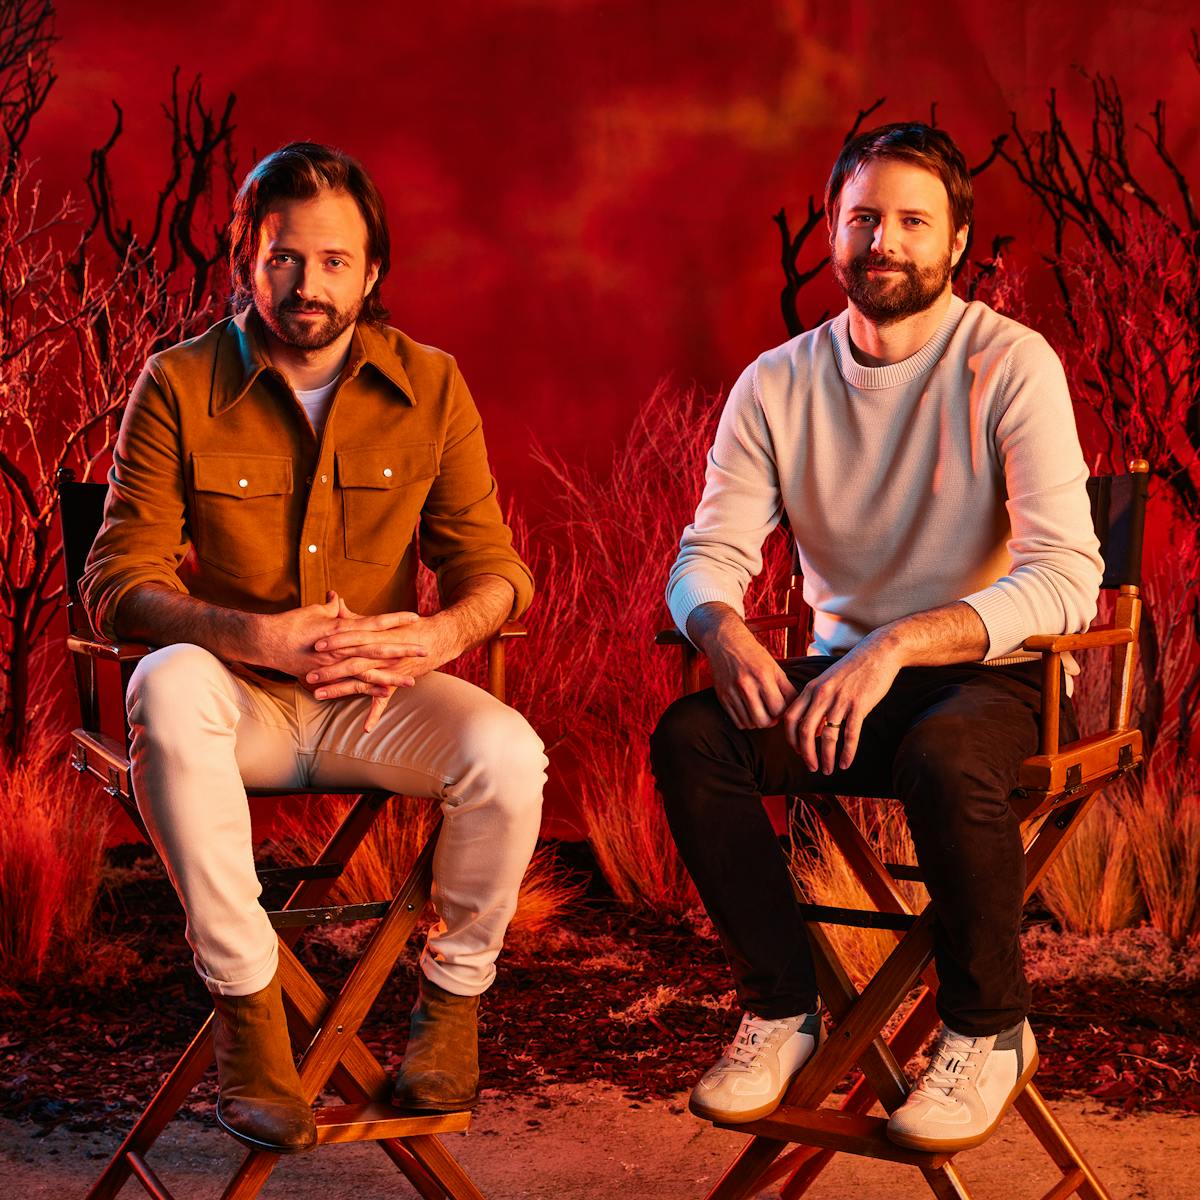 Matt and Ross Duffer sit in directors chairs against a fiery red backdrop.